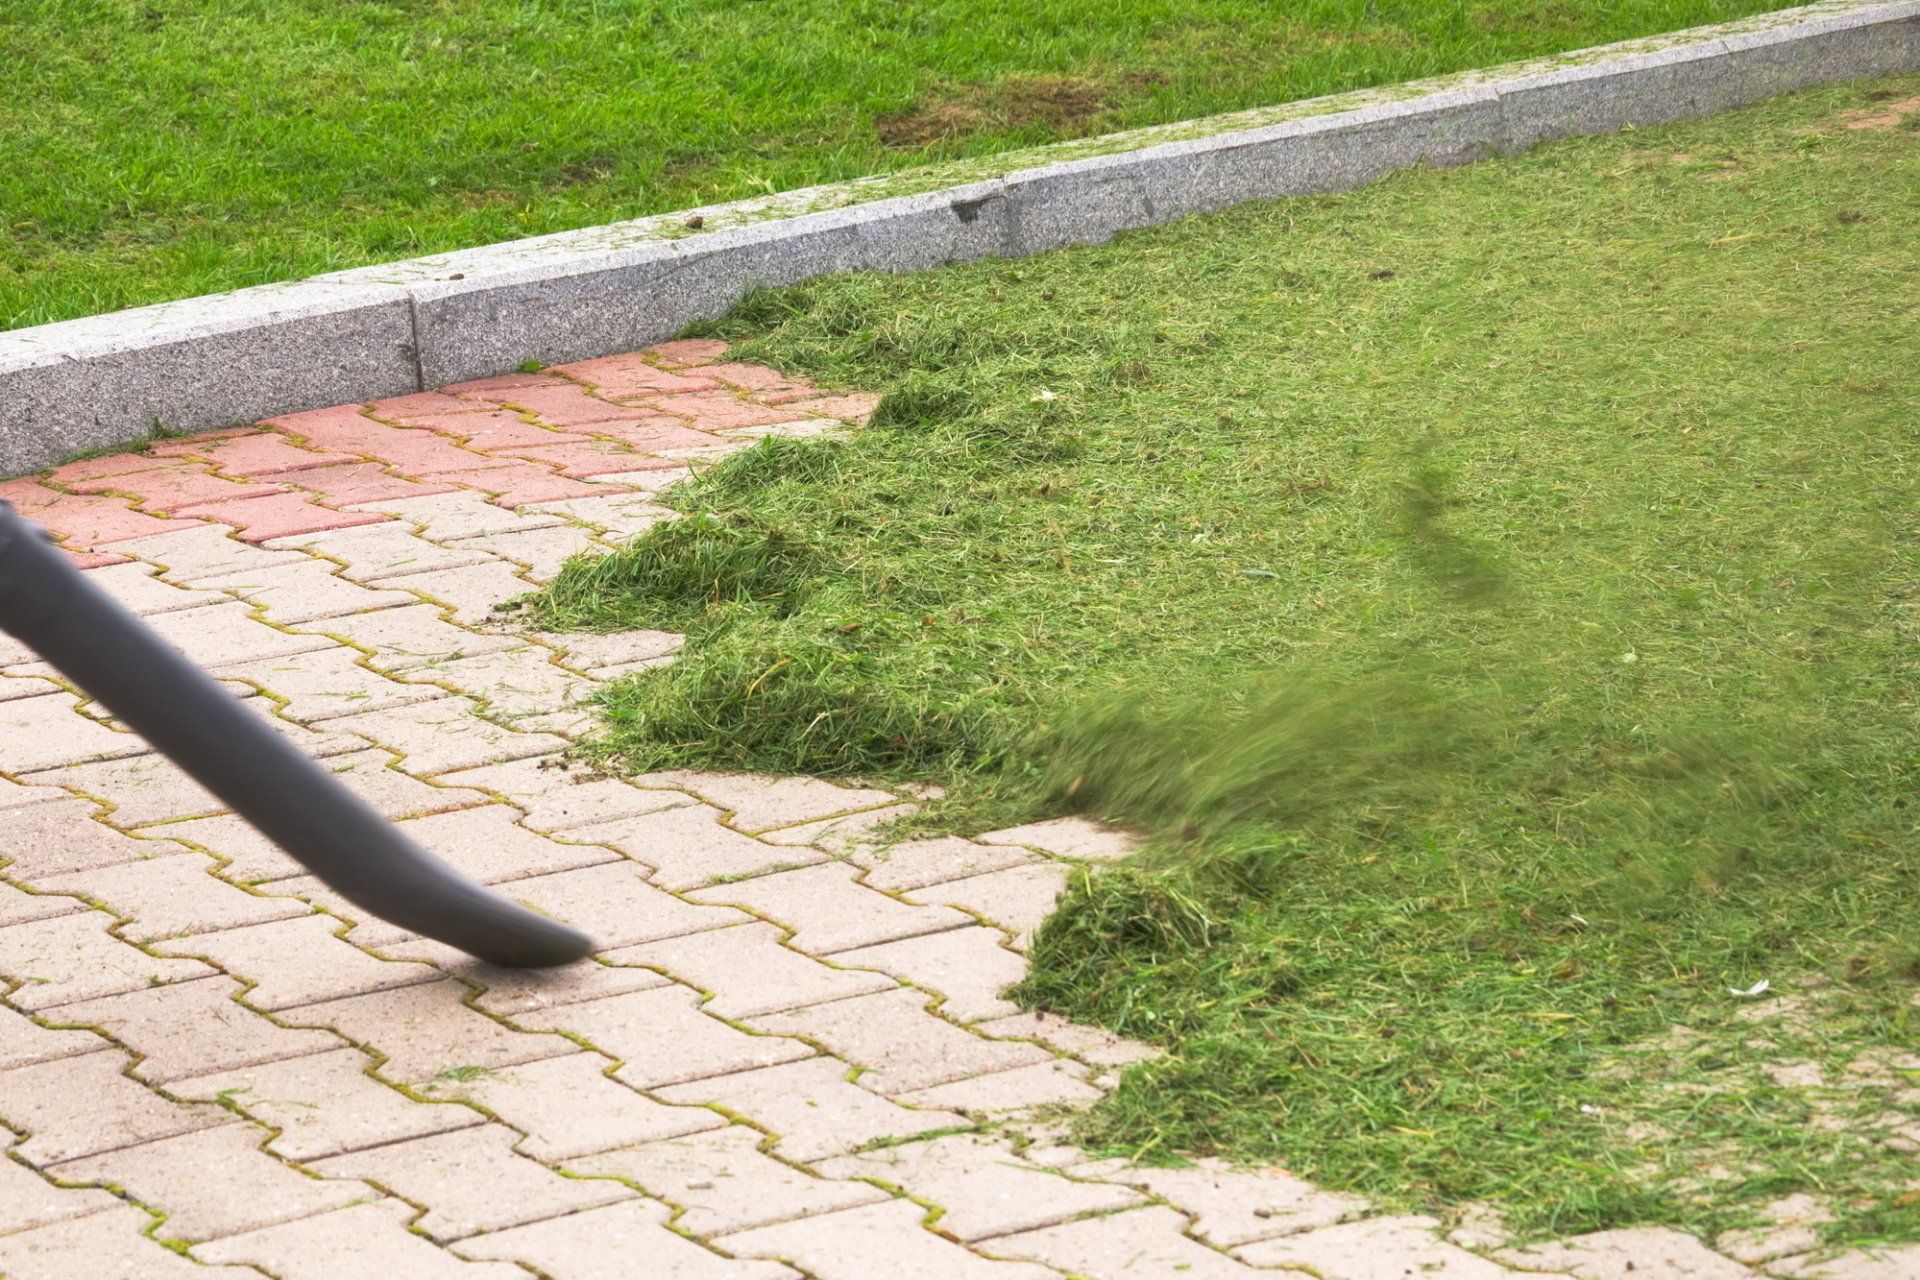 Yard Cleanups in Saugus, MA | Top Notch Services Inc.